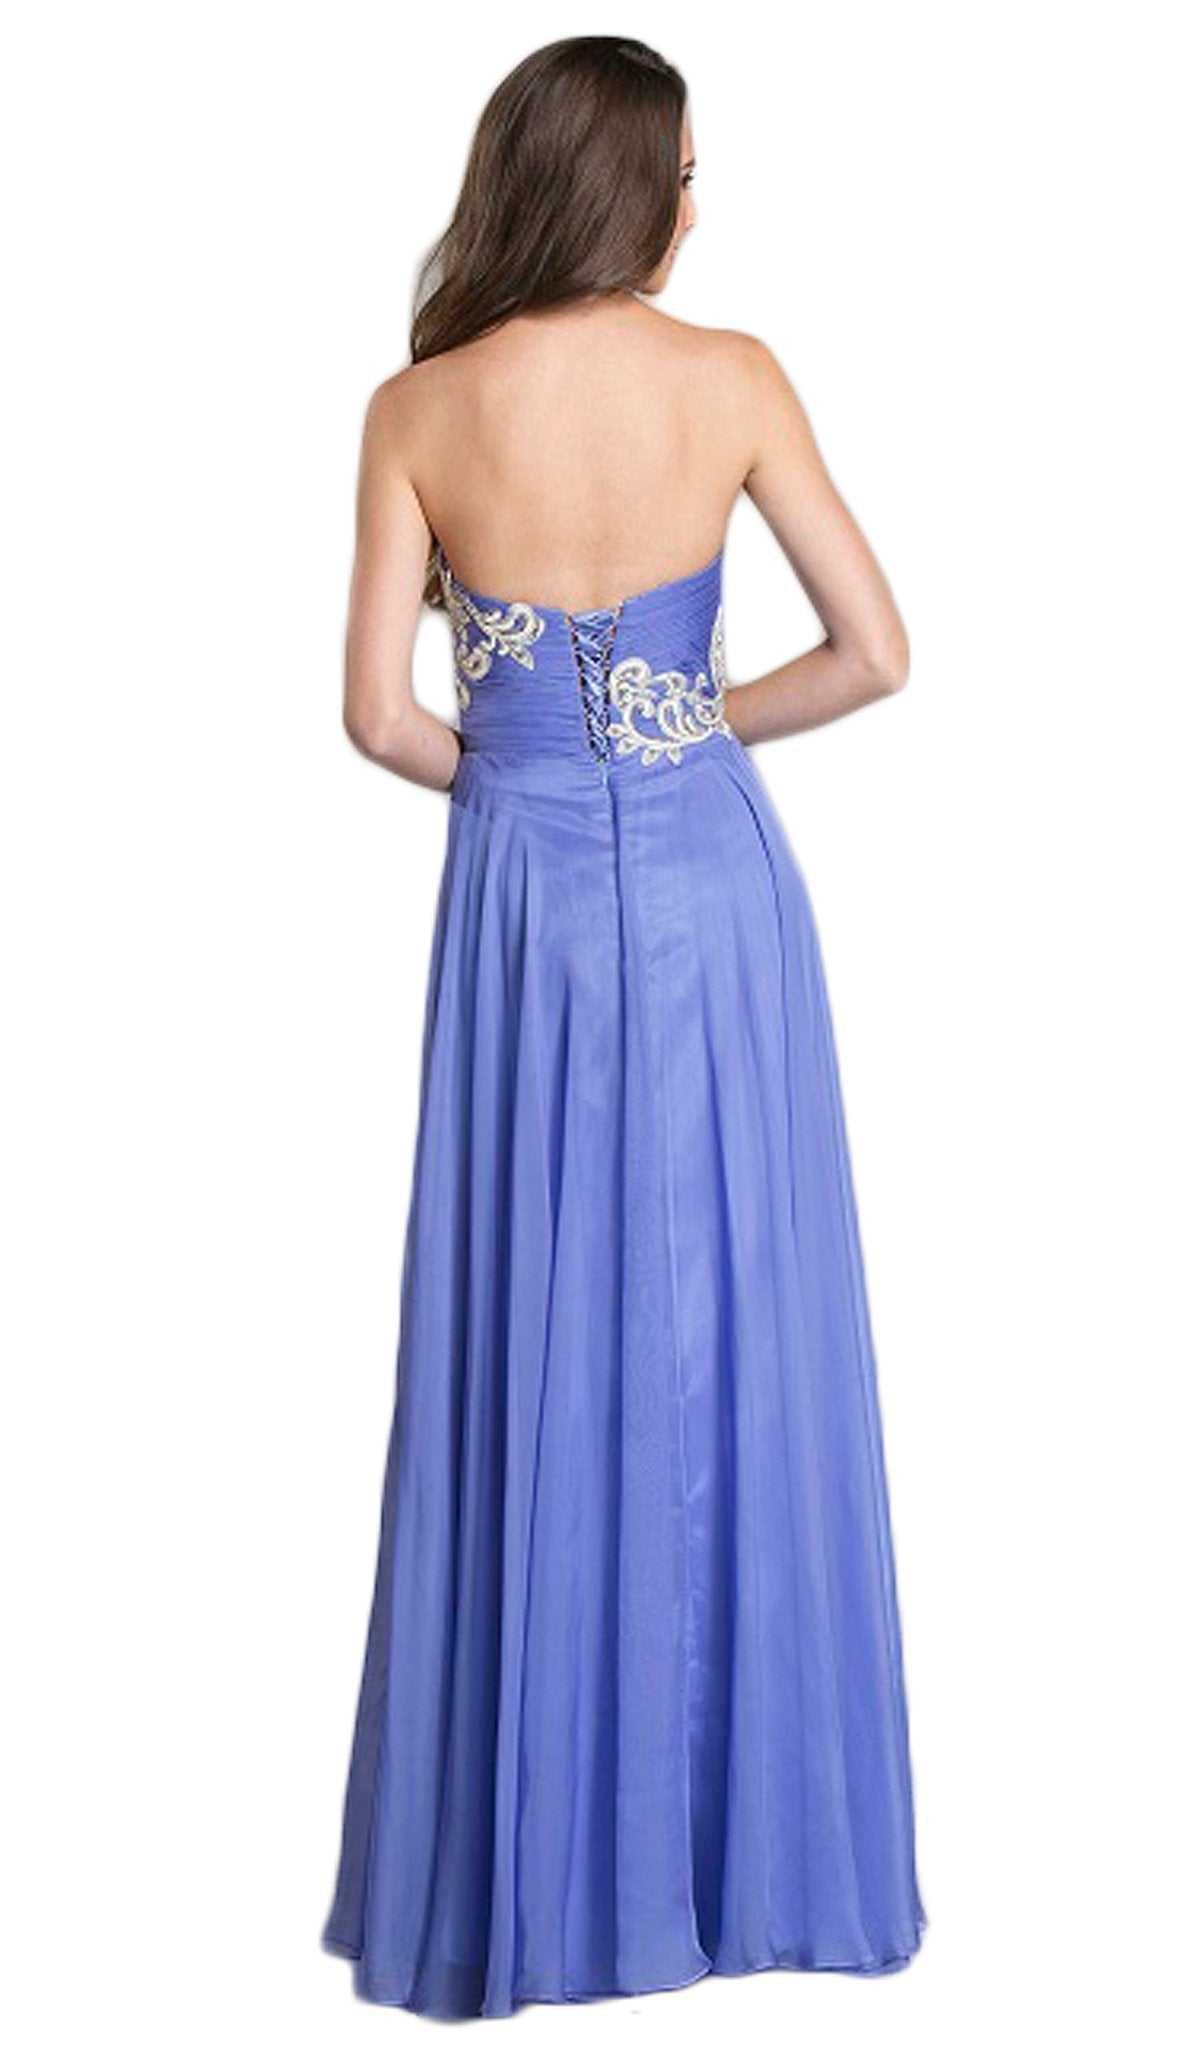 Aspeed Design, Aspeed Design - Strapless Ruched A-Line Affordable Prom Gown